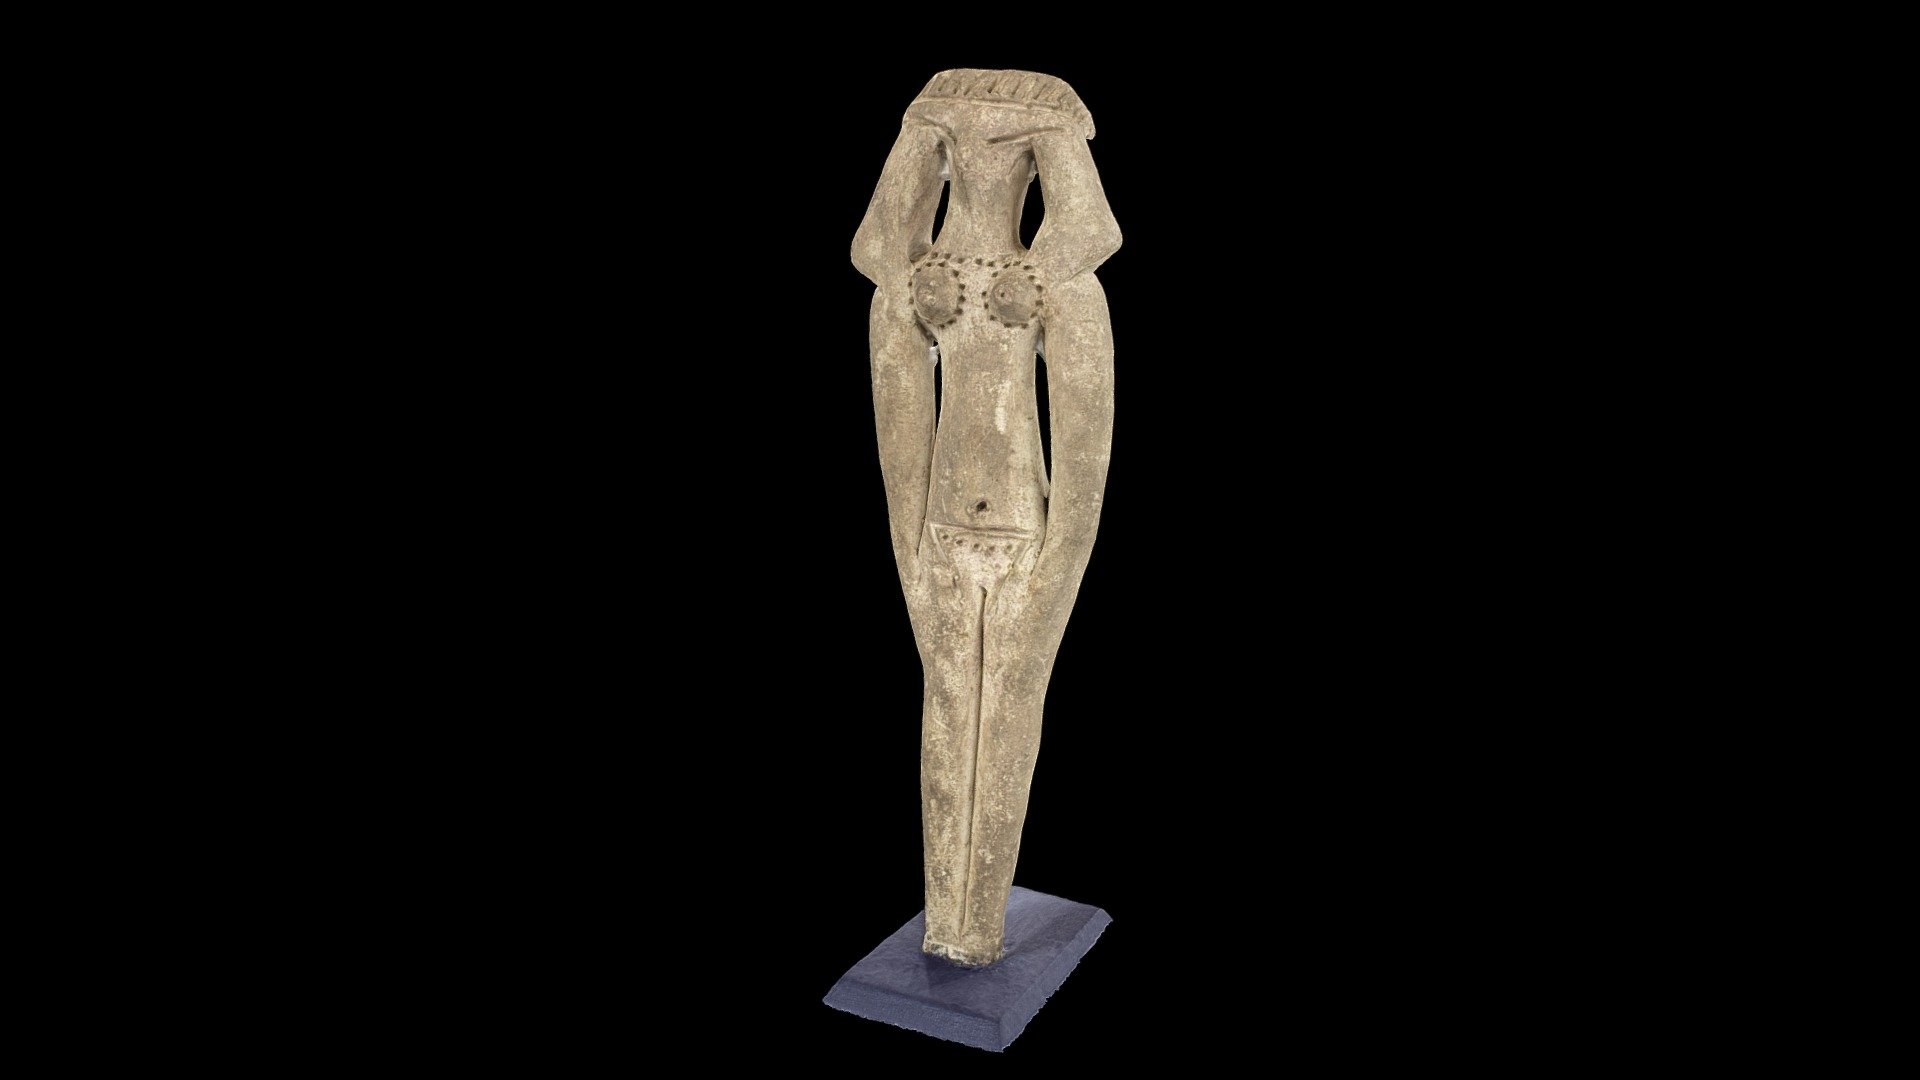 The high mortality rate in Ancient Egypt made fertility all the more important. This lady depicts the successful result of fertility; her attire is that of a woman who has successfully given birth.
This ceramic statue was made during Second Intermediate Period, 1640-1550 BCE.

3D model created by Abigail Crawford 3d model